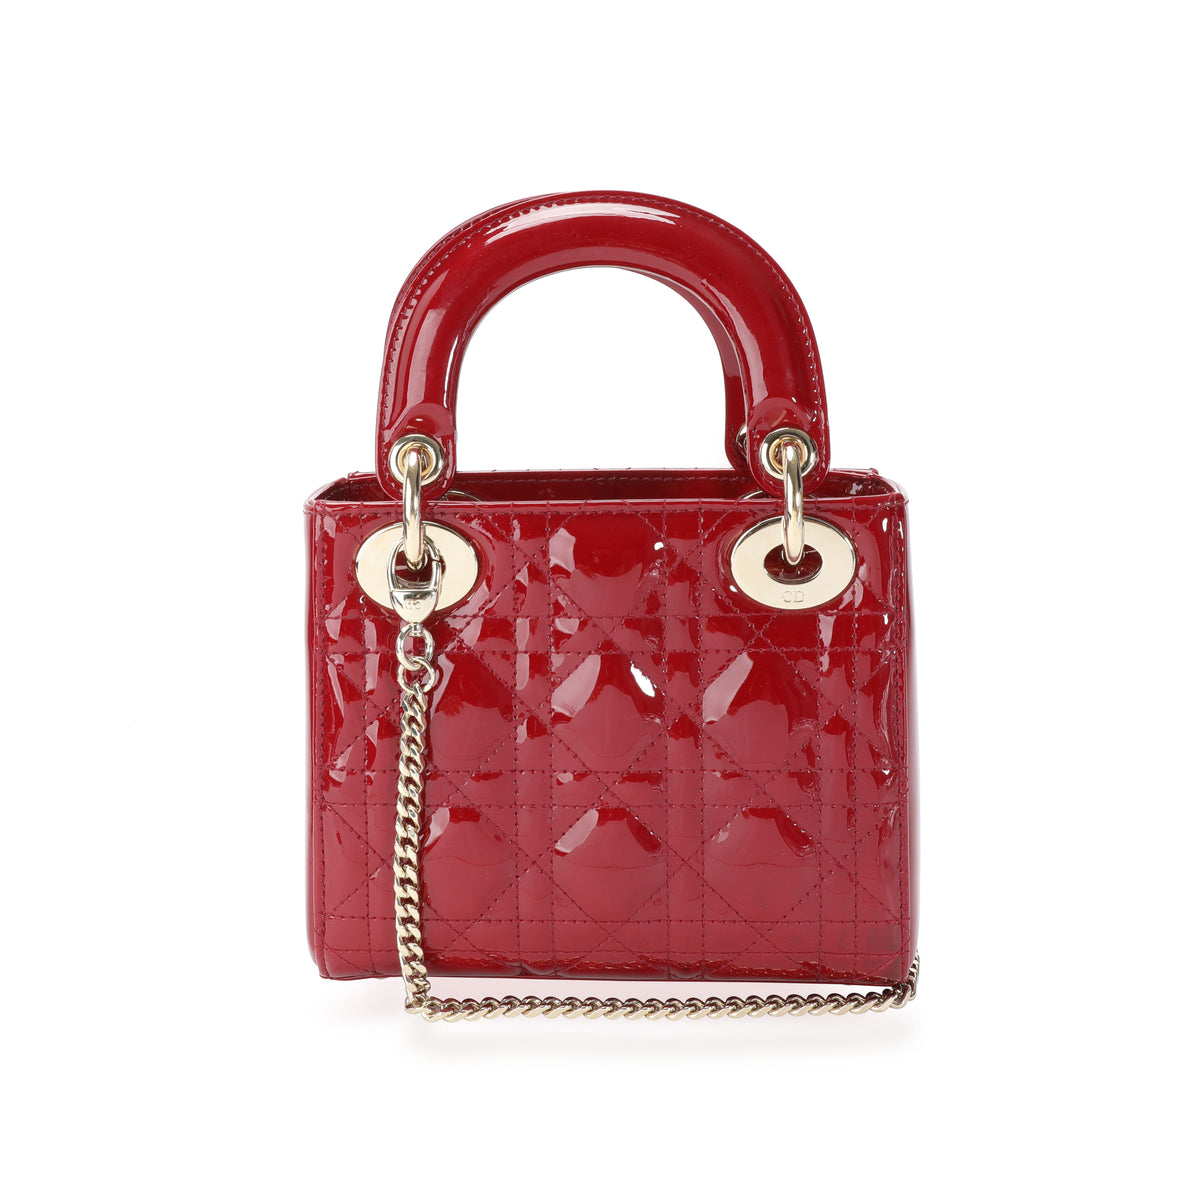 Louis Vuitton Alma Mini Shoulder Bag in Pink and Red Bicolor Patent